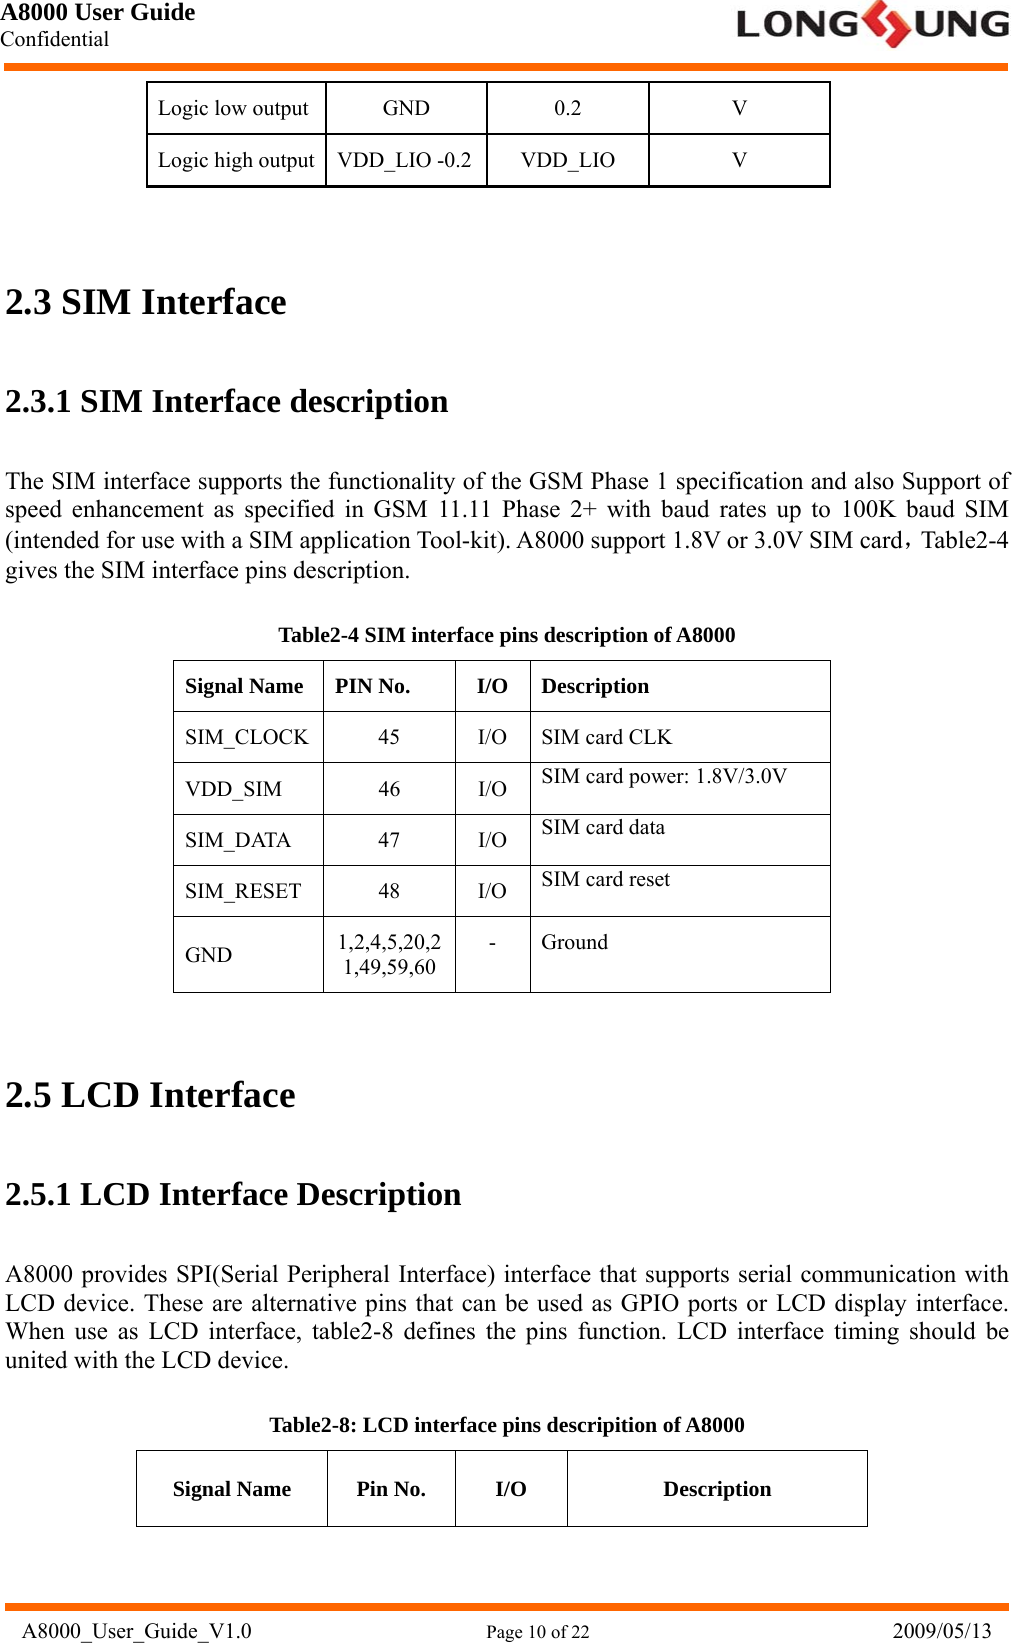 A8000 User Guide Confidential   A8000_User_Guide_V1.0                      Page 10 of 22                            2009/05/13 Logic low output  GND  0.2  V Logic high output  VDD_LIO -0.2 VDD_LIO  V  2.3 SIM Interface 2.3.1 SIM Interface description The SIM interface supports the functionality of the GSM Phase 1 specification and also Support of speed enhancement as specified in GSM 11.11 Phase 2+ with baud rates up to 100K baud SIM (intended for use with a SIM application Tool-kit). A8000 support 1.8V or 3.0V SIM card，Table2-4 gives the SIM interface pins description. Table2-4 SIM interface pins description of A8000 Signal Name  PIN No.  I/O  Description SIM_CLOCK  45  I/O  SIM card CLK VDD_SIM 46 I/O SIM card power: 1.8V/3.0V SIM_DATA 47 I/O SIM card data SIM_RESET 48 I/O SIM card reset GND  1,2,4,5,20,21,49,59,60 - Ground  2.5 LCD Interface 2.5.1 LCD Interface Description A8000 provides SPI(Serial Peripheral Interface) interface that supports serial communication with LCD device. These are alternative pins that can be used as GPIO ports or LCD display interface. When use as LCD interface, table2-8 defines the pins function. LCD interface timing should be united with the LCD device. Table2-8: LCD interface pins descripition of A8000 Signal Name  Pin No.  I/O  Description 